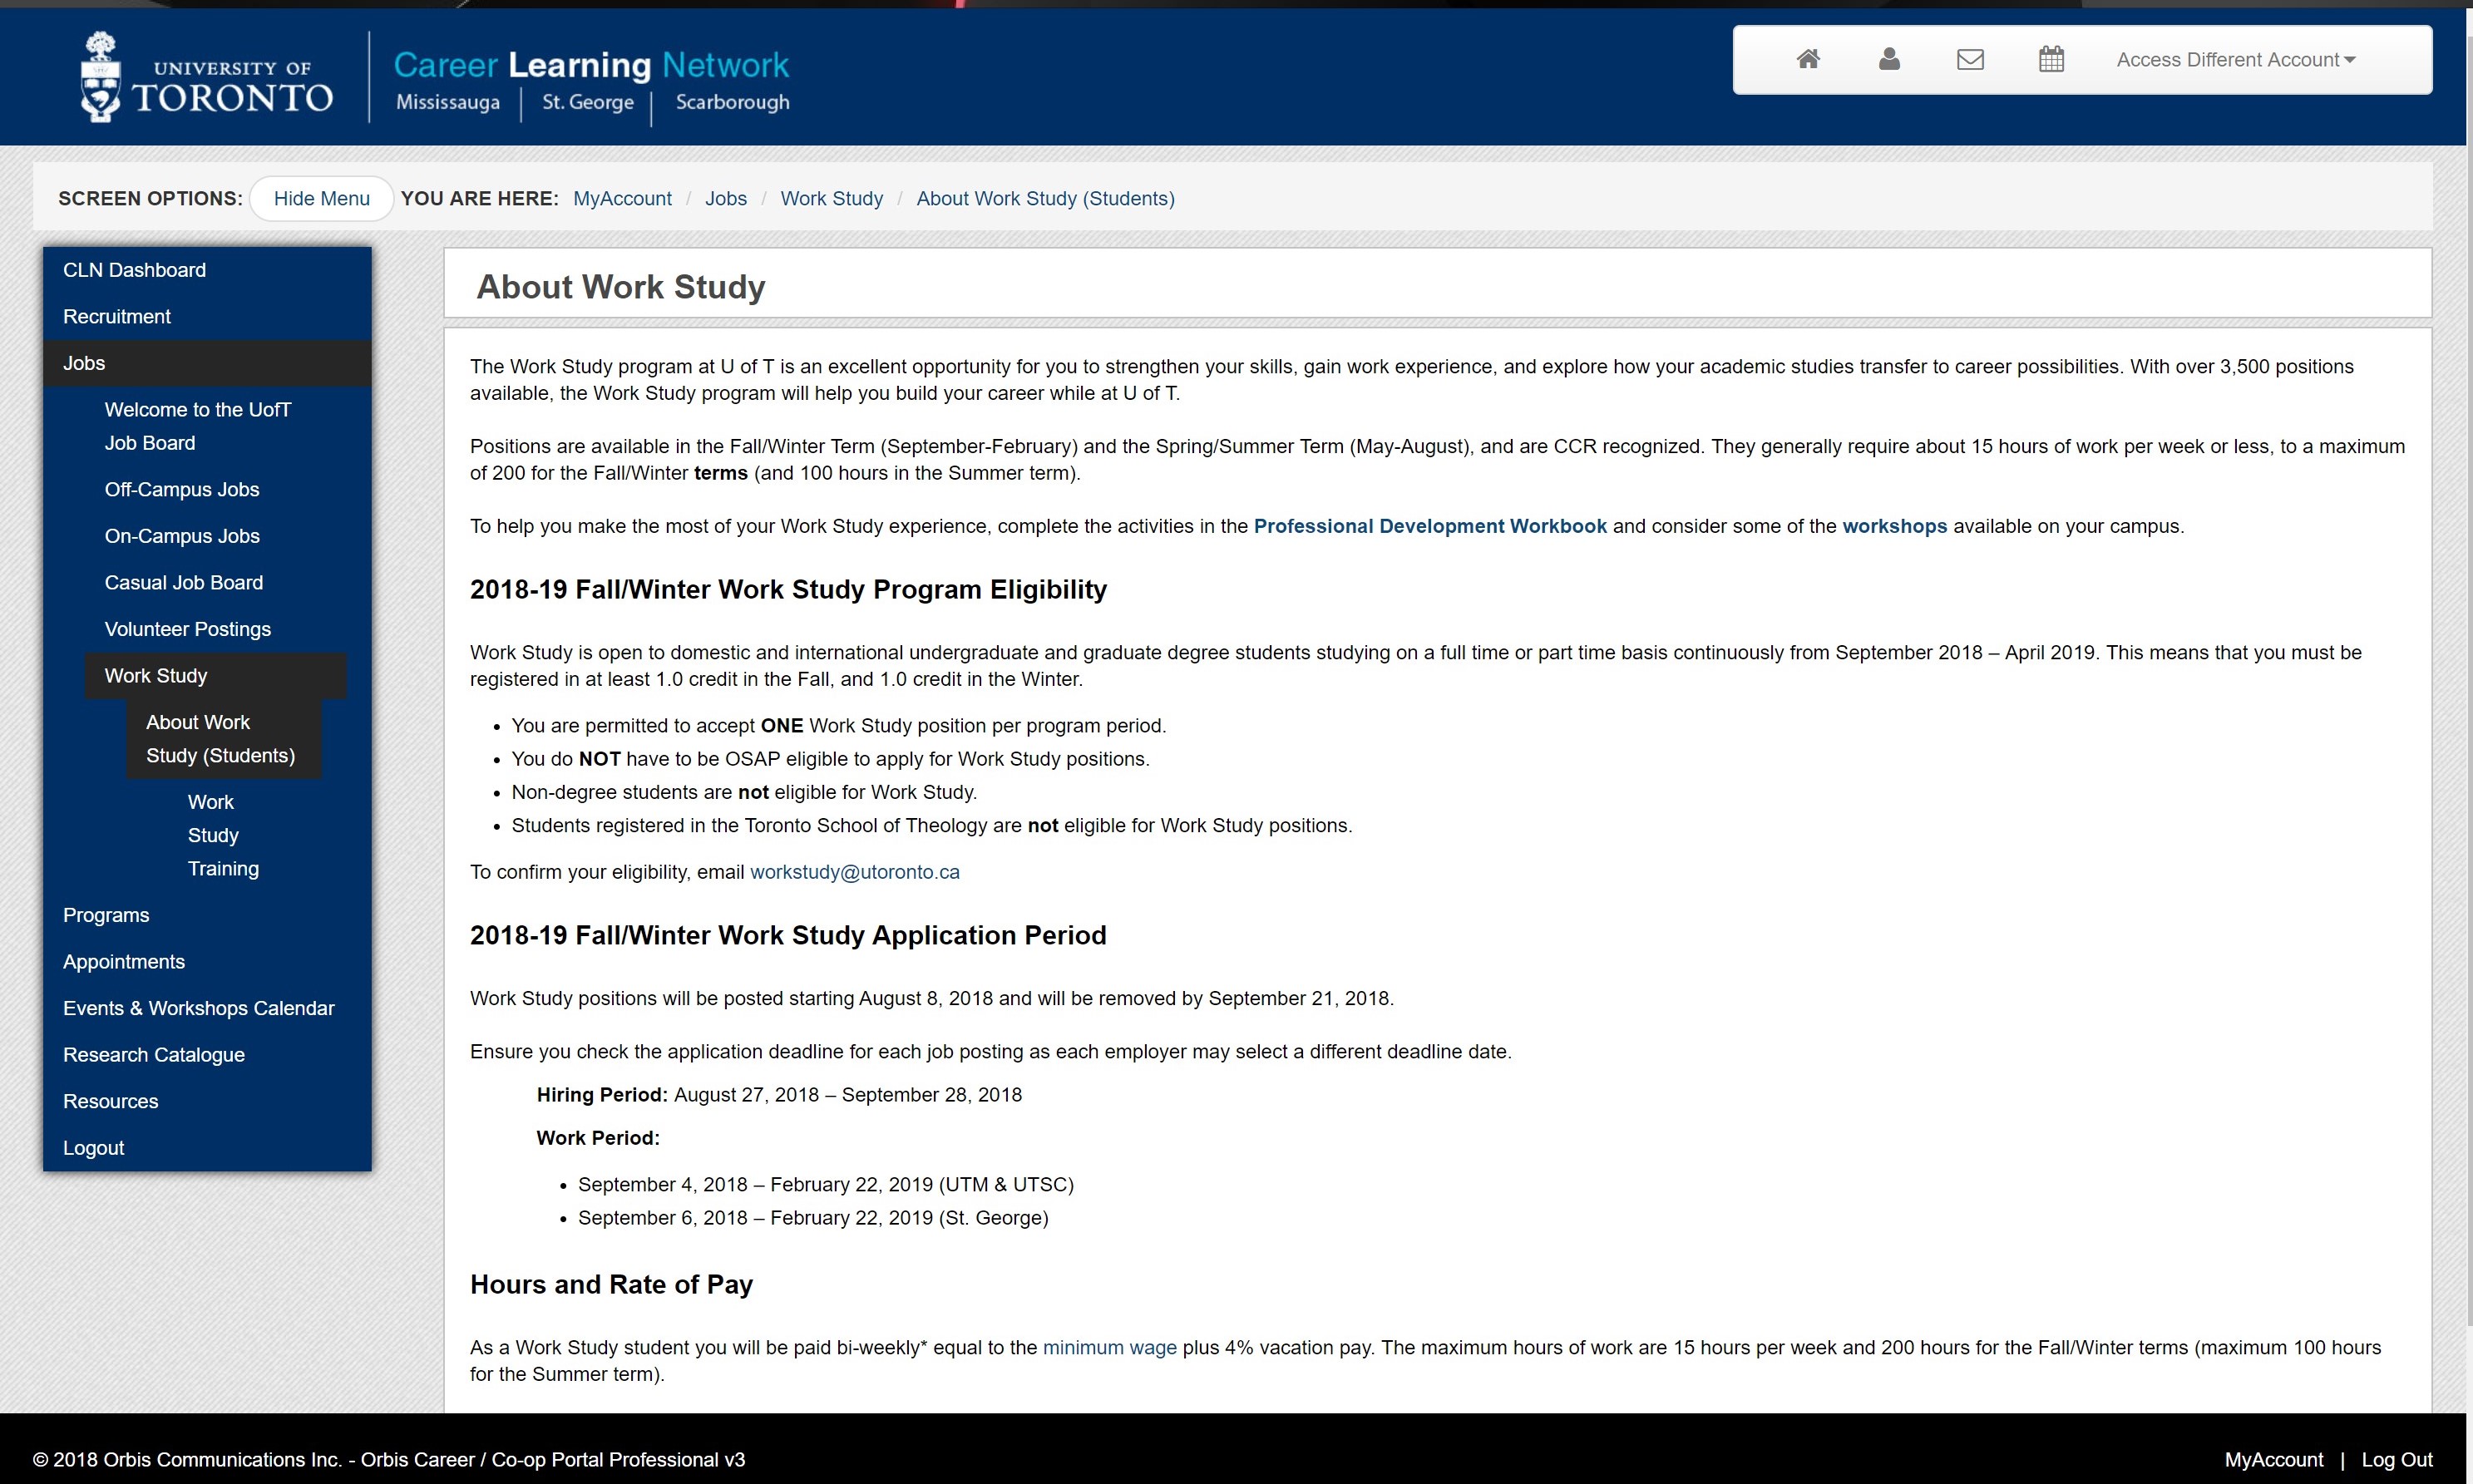 a screen-capture of the work-study page on the career learning network